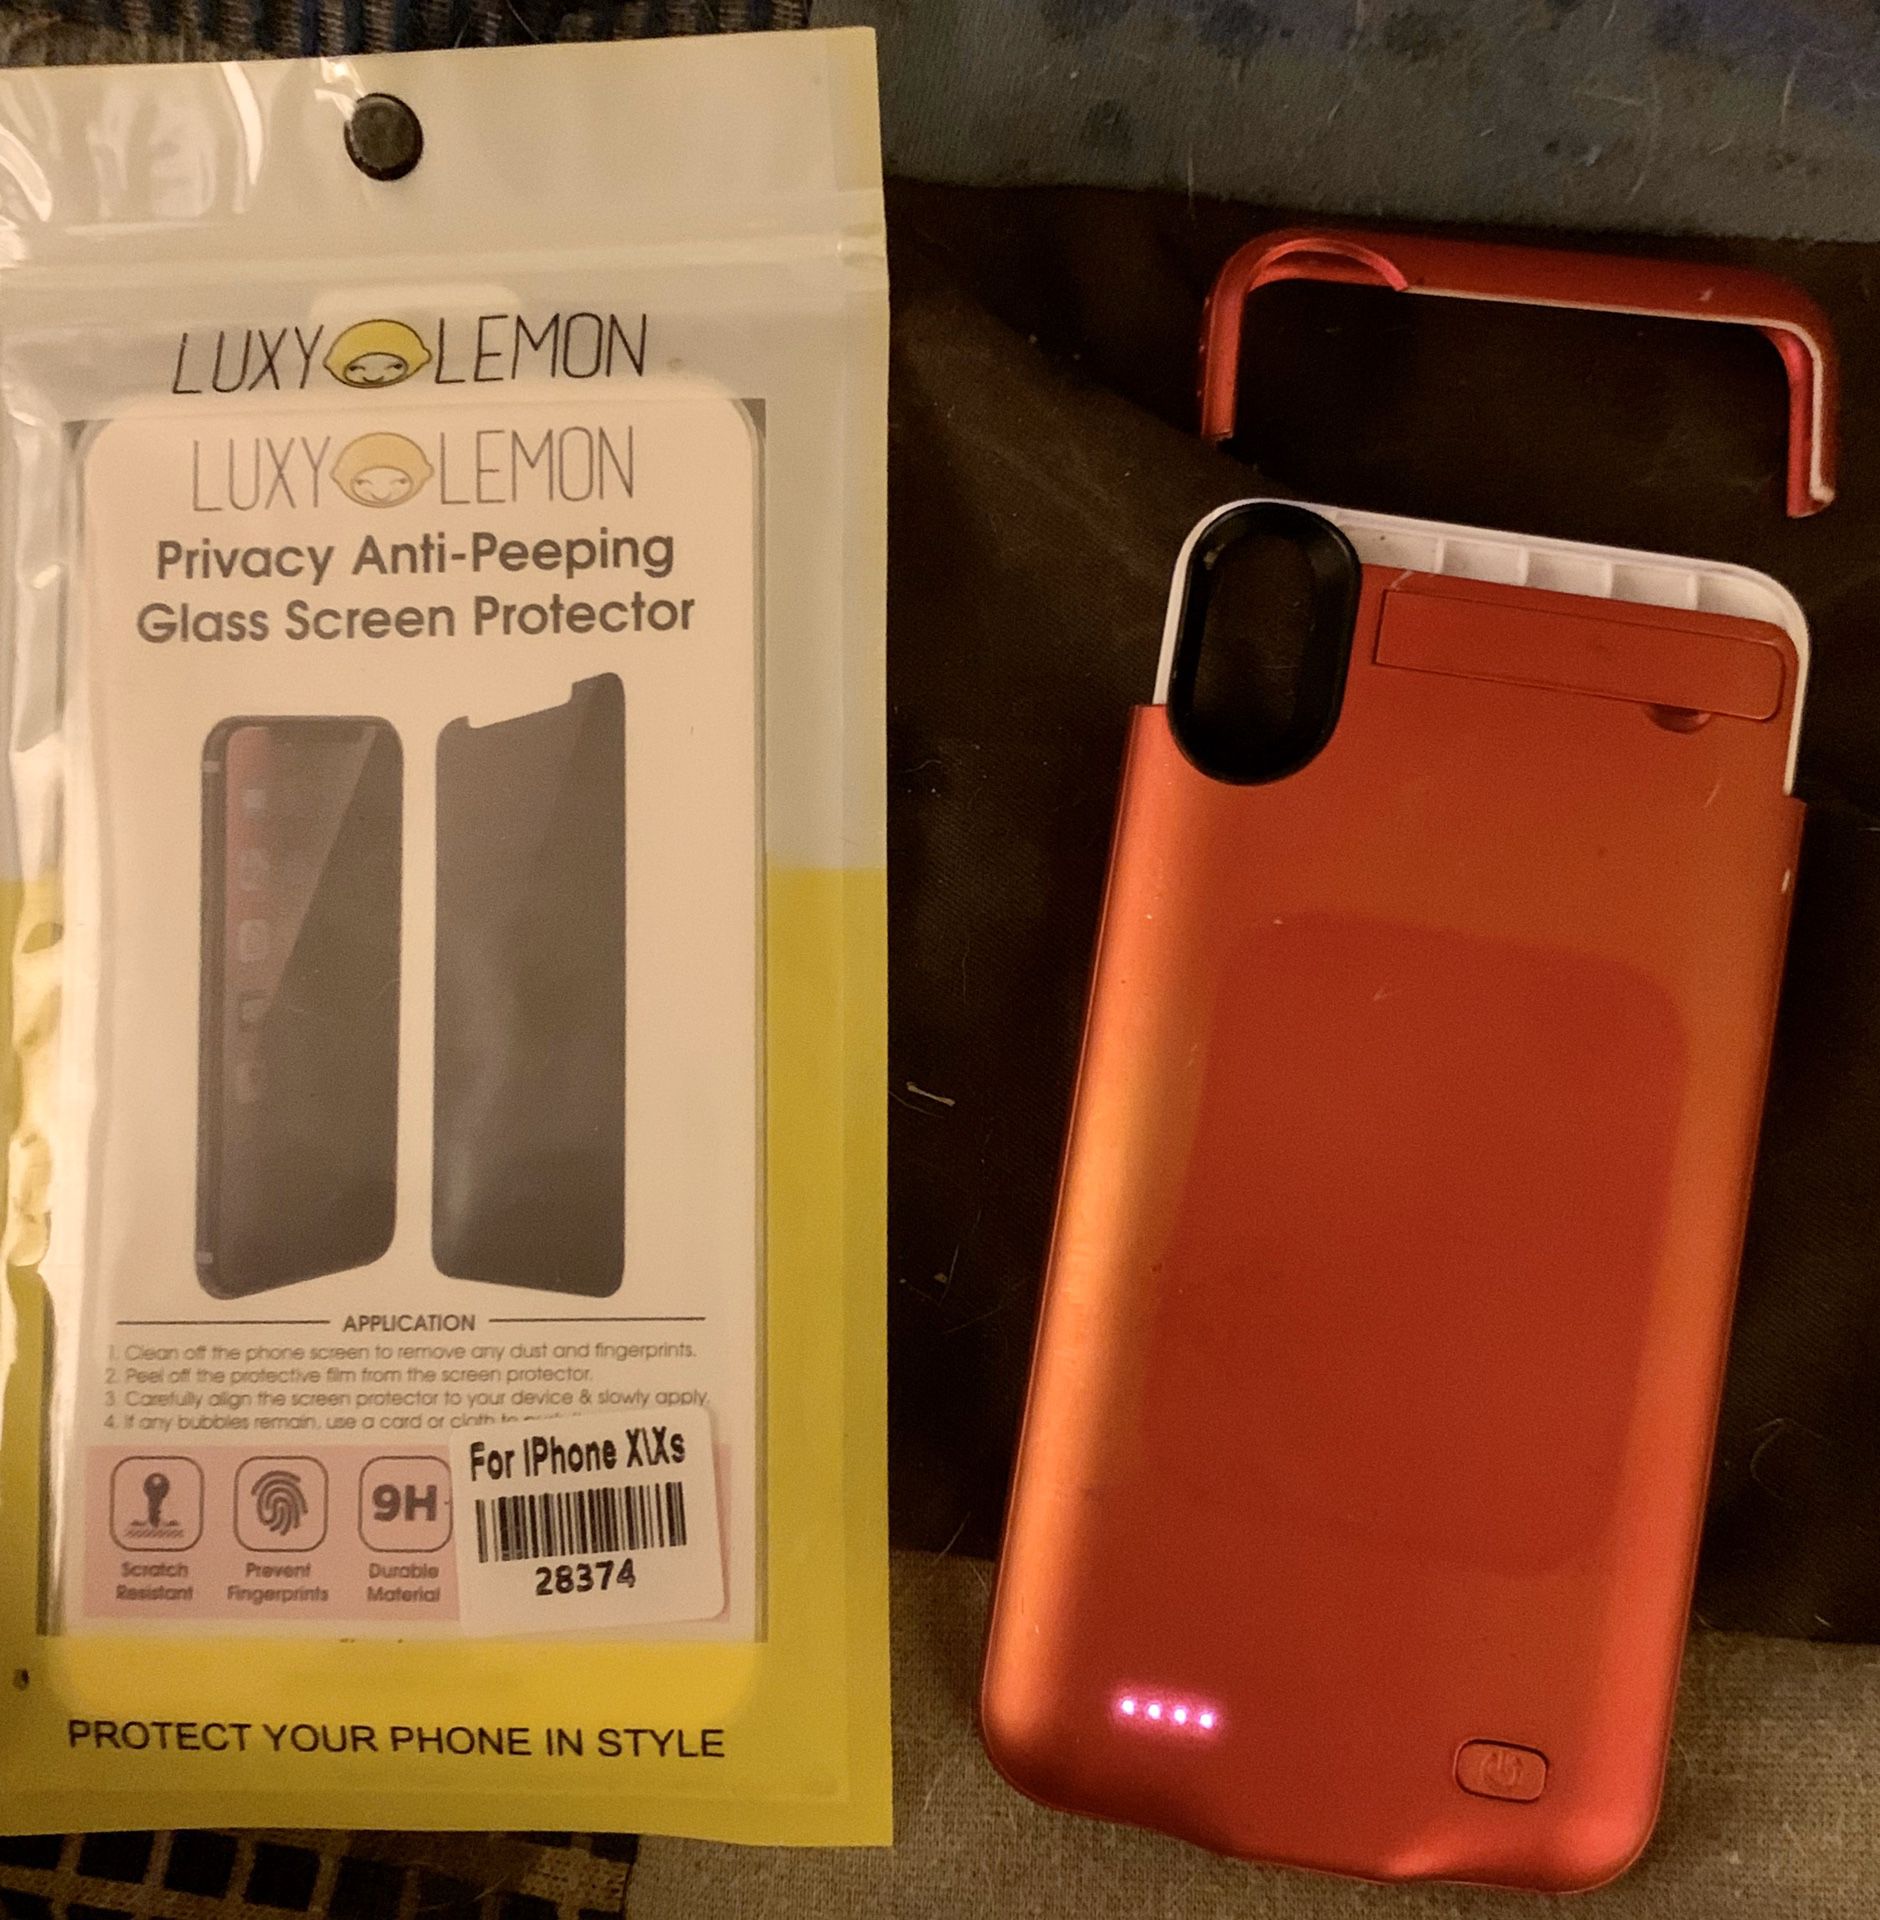 NEW Anti peep screen protector for IPHONE X/XS. IPHONE XS MAX Battery case LIKE NEW